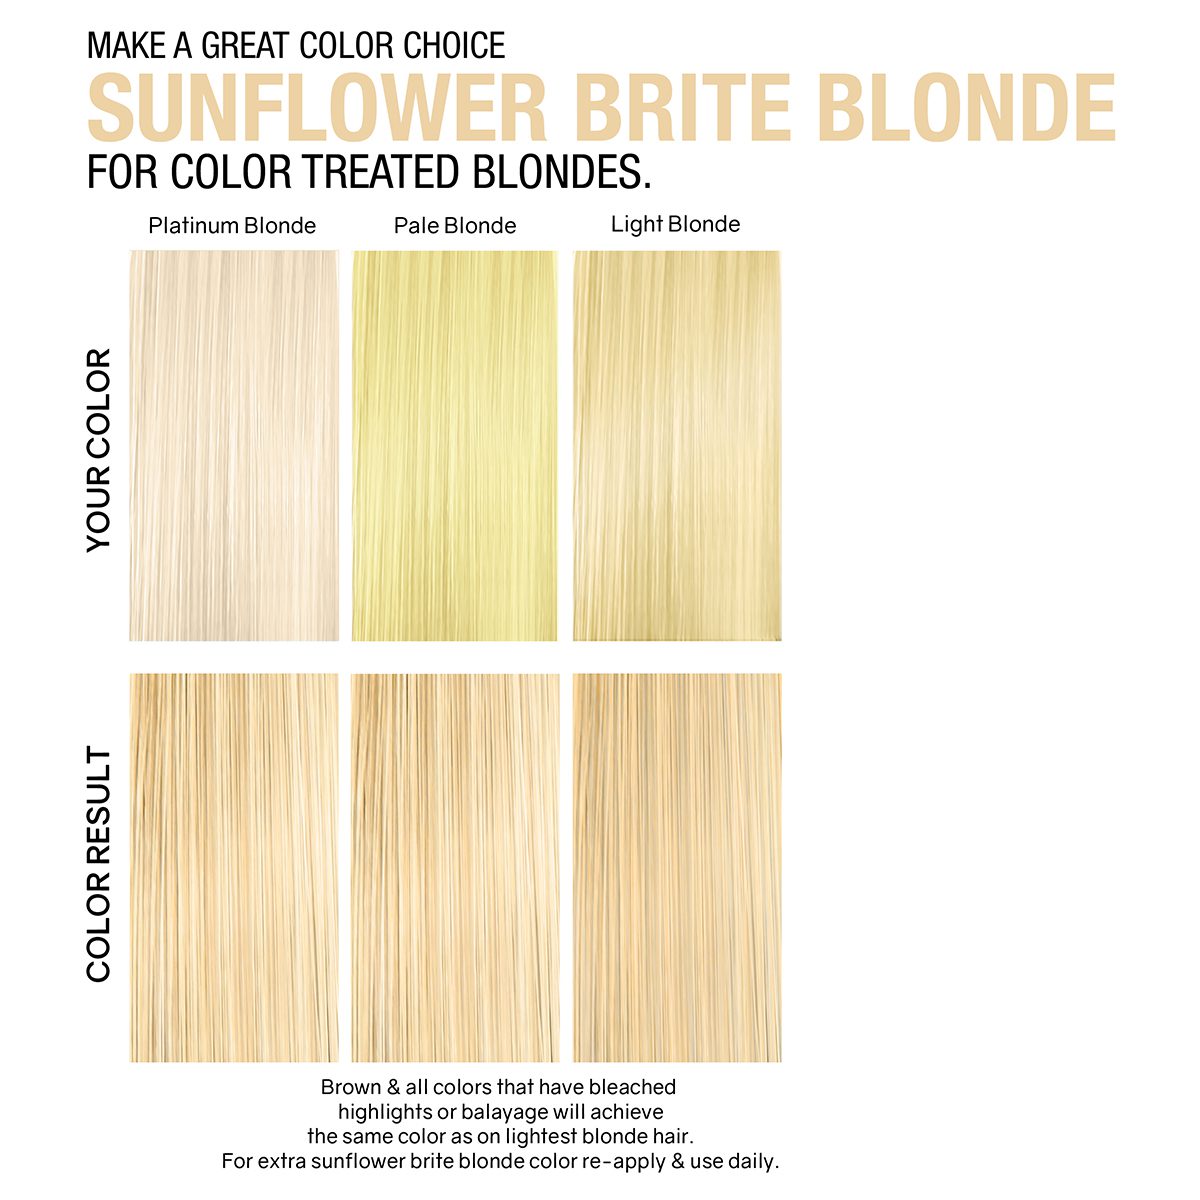 Sunflower Brite Blonde for color treated blondes.